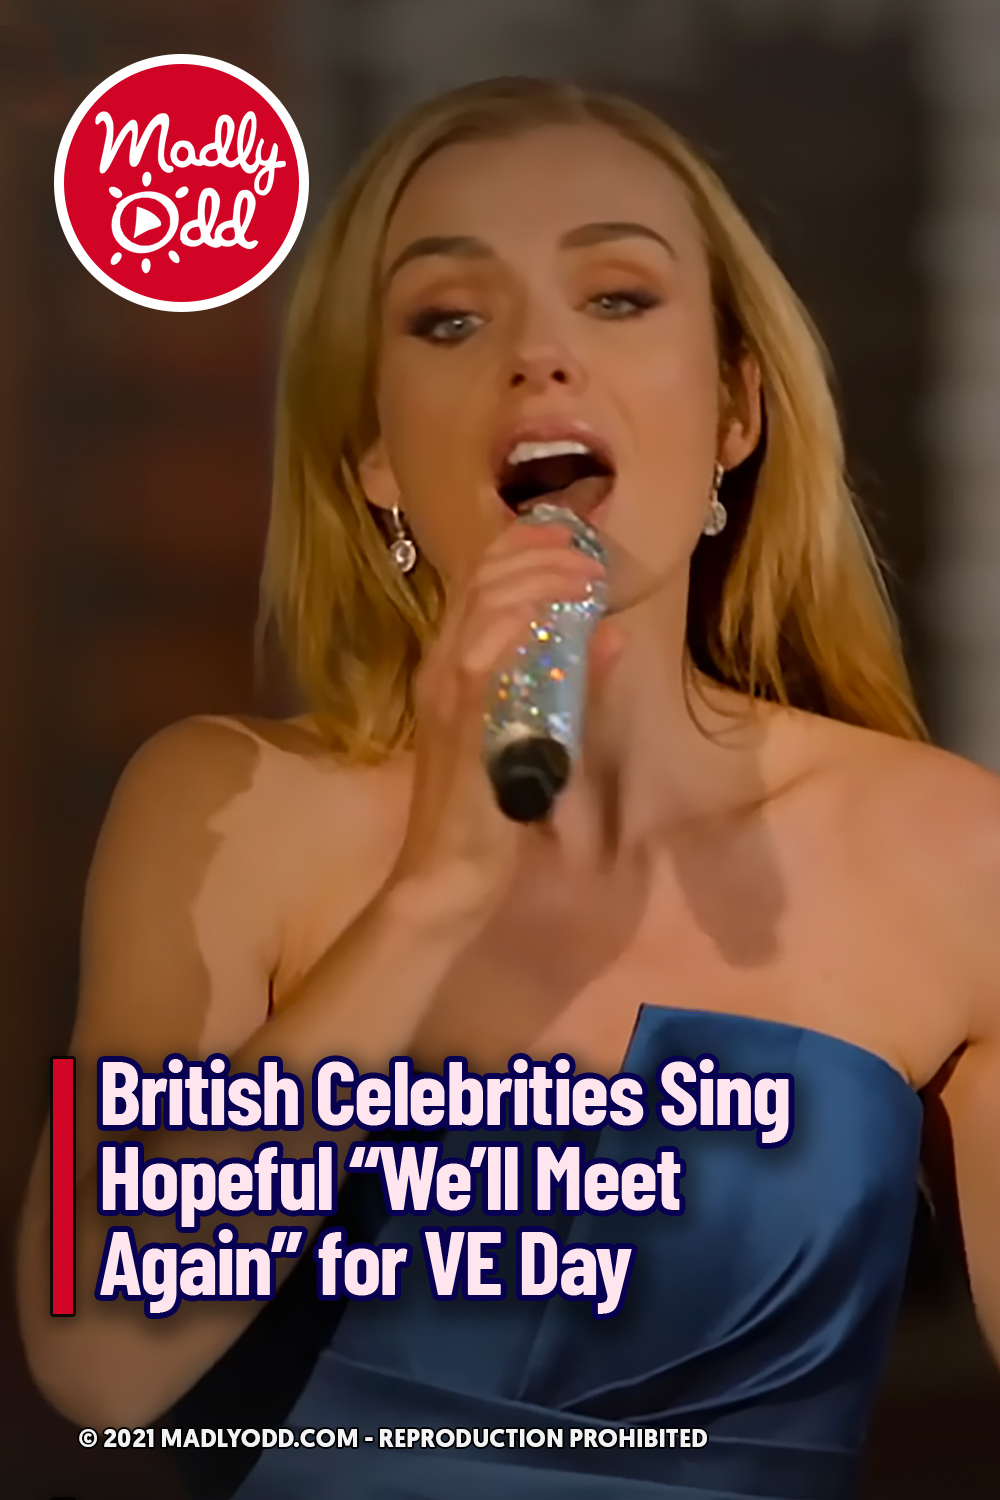 British Celebrities Sing Hopeful “We’ll Meet Again” for VE Day